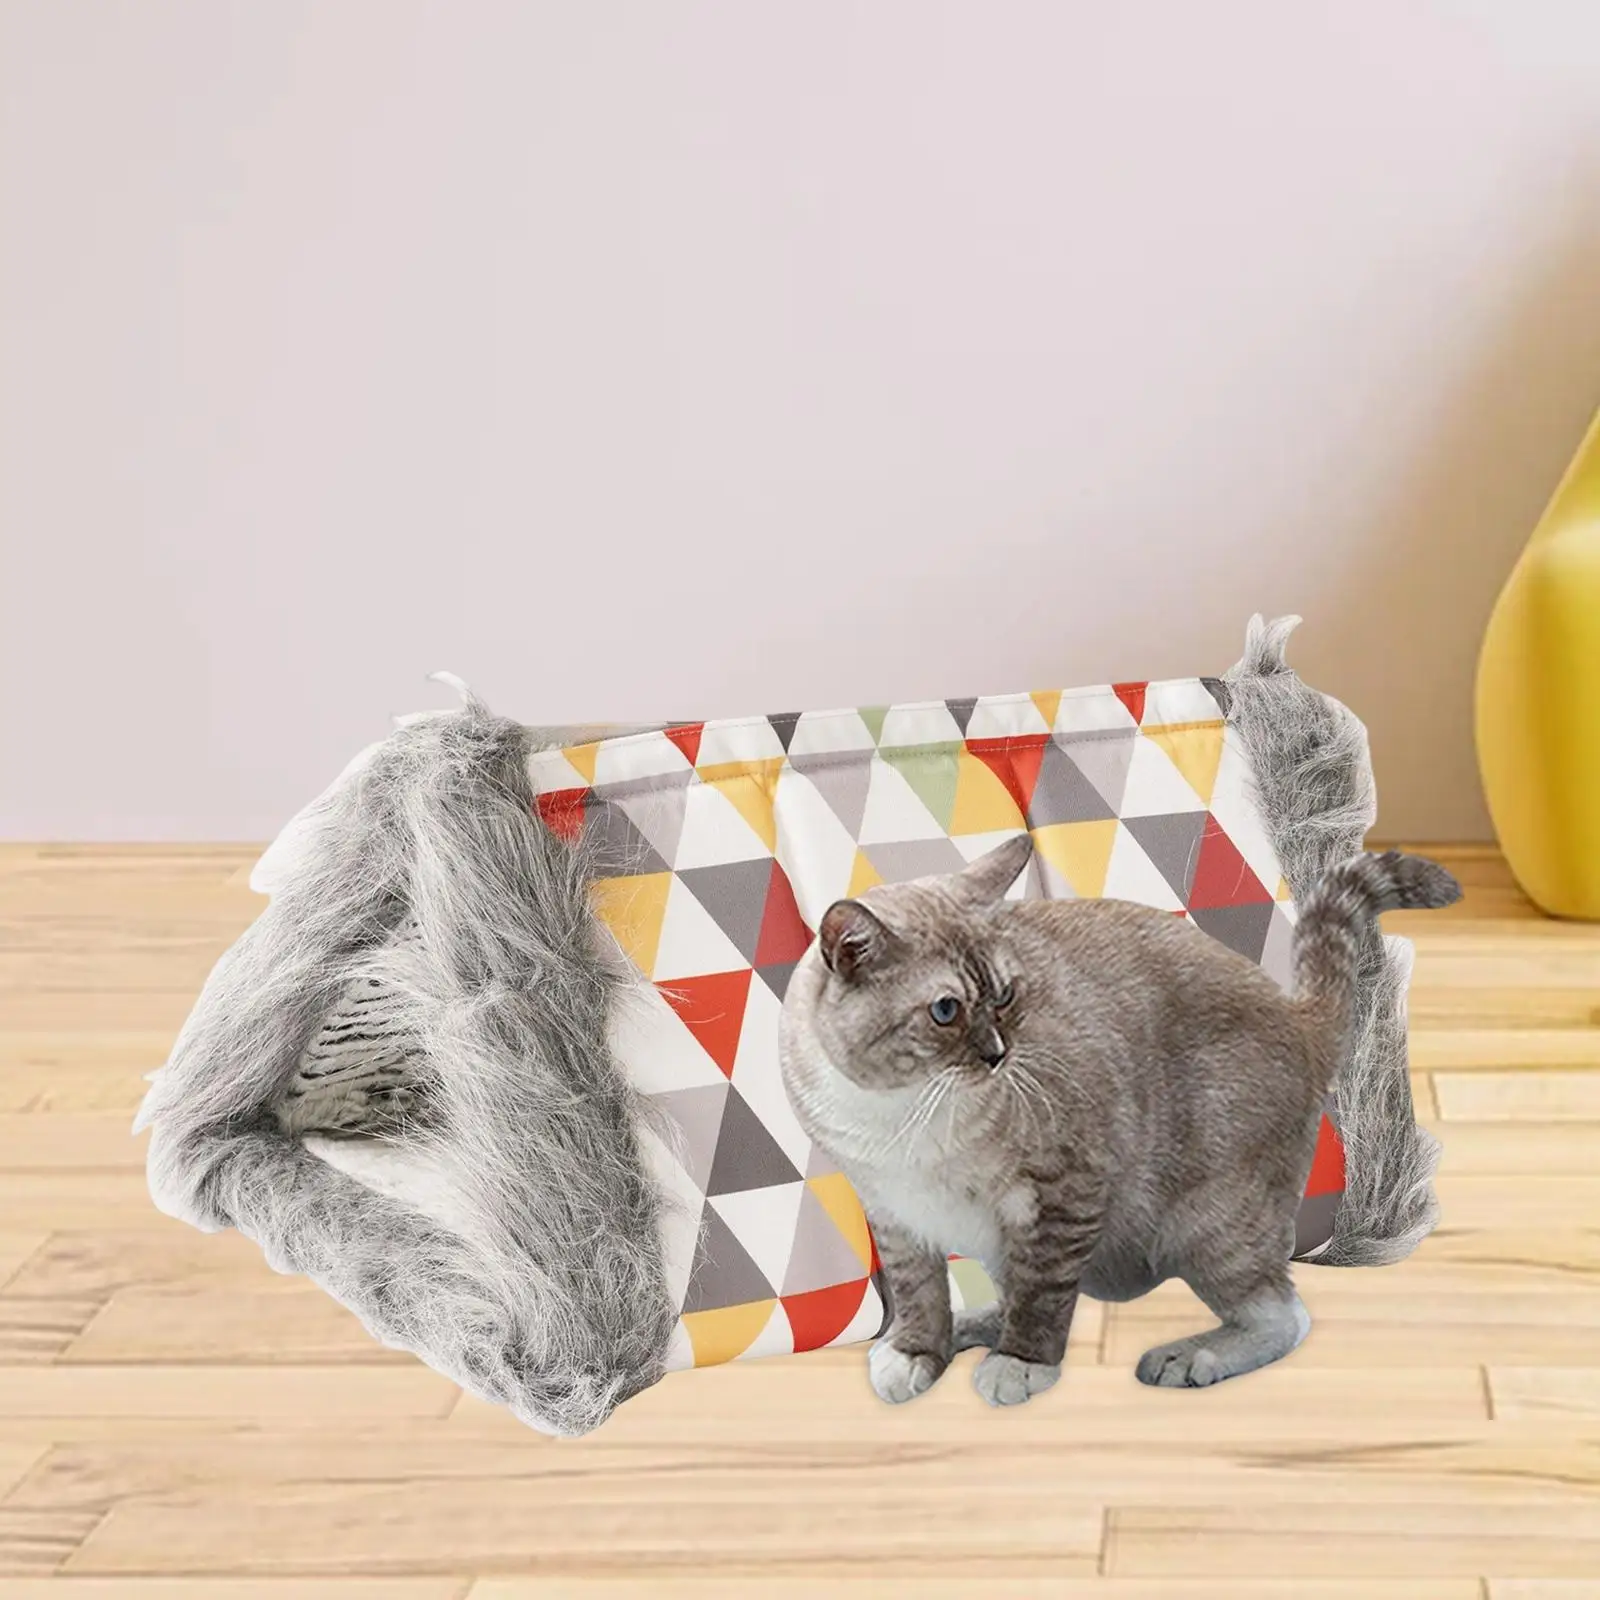 2 in 1 Dog Tent Soft Plush Hut Cushion Reversible Mat Sleep Washable Pad Cat Warm House Cave Pet Bed for Doggy Small Medium Dogs